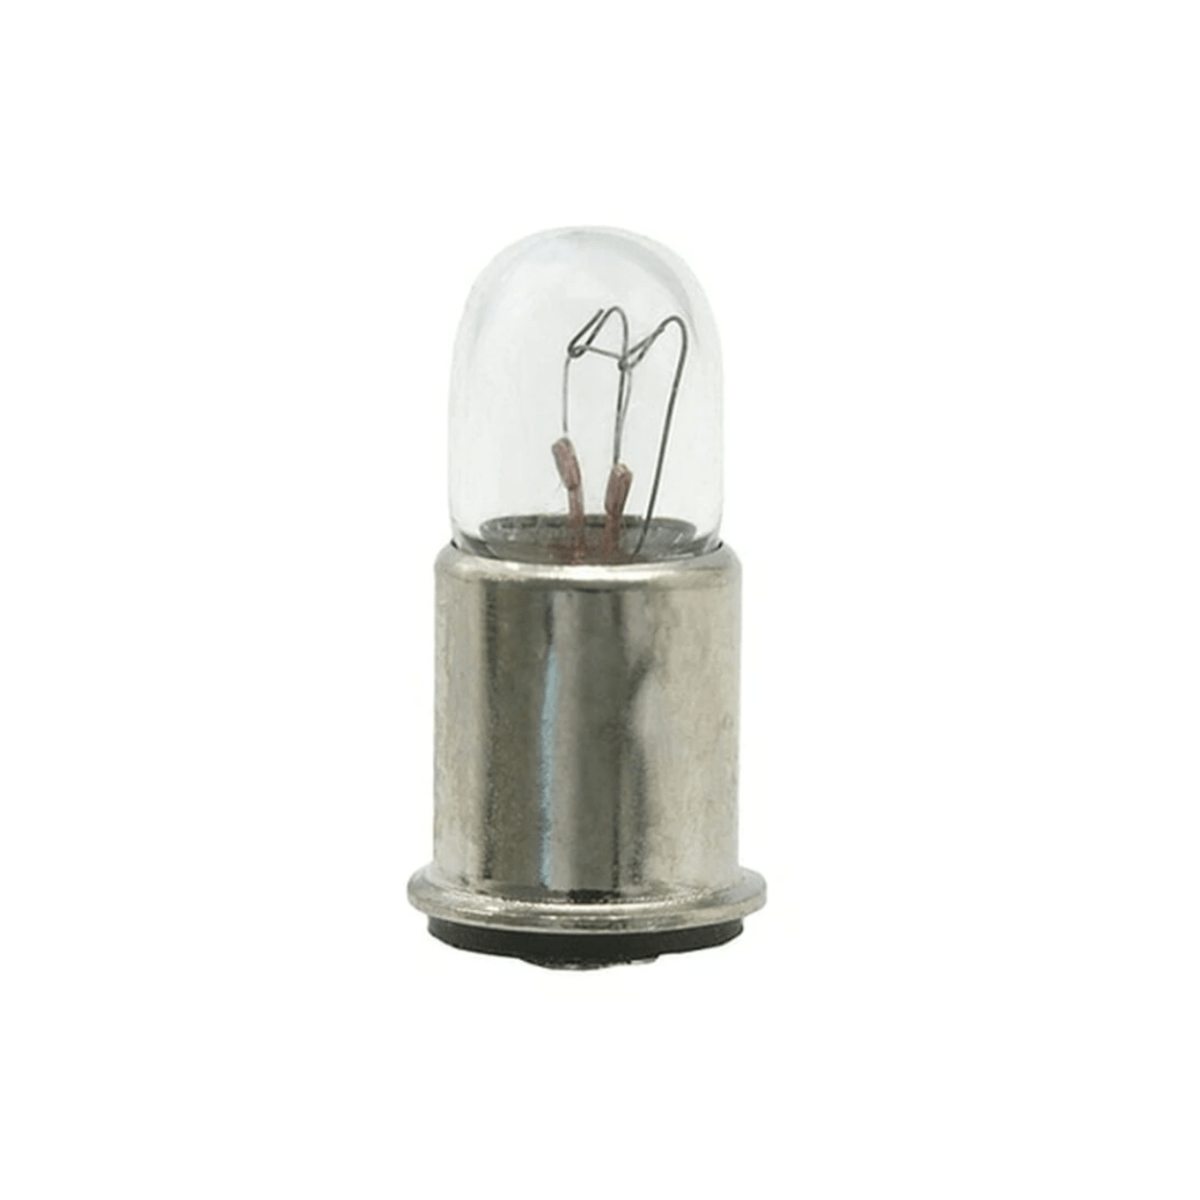 Photo of morley pedals bulb at Analog Classics